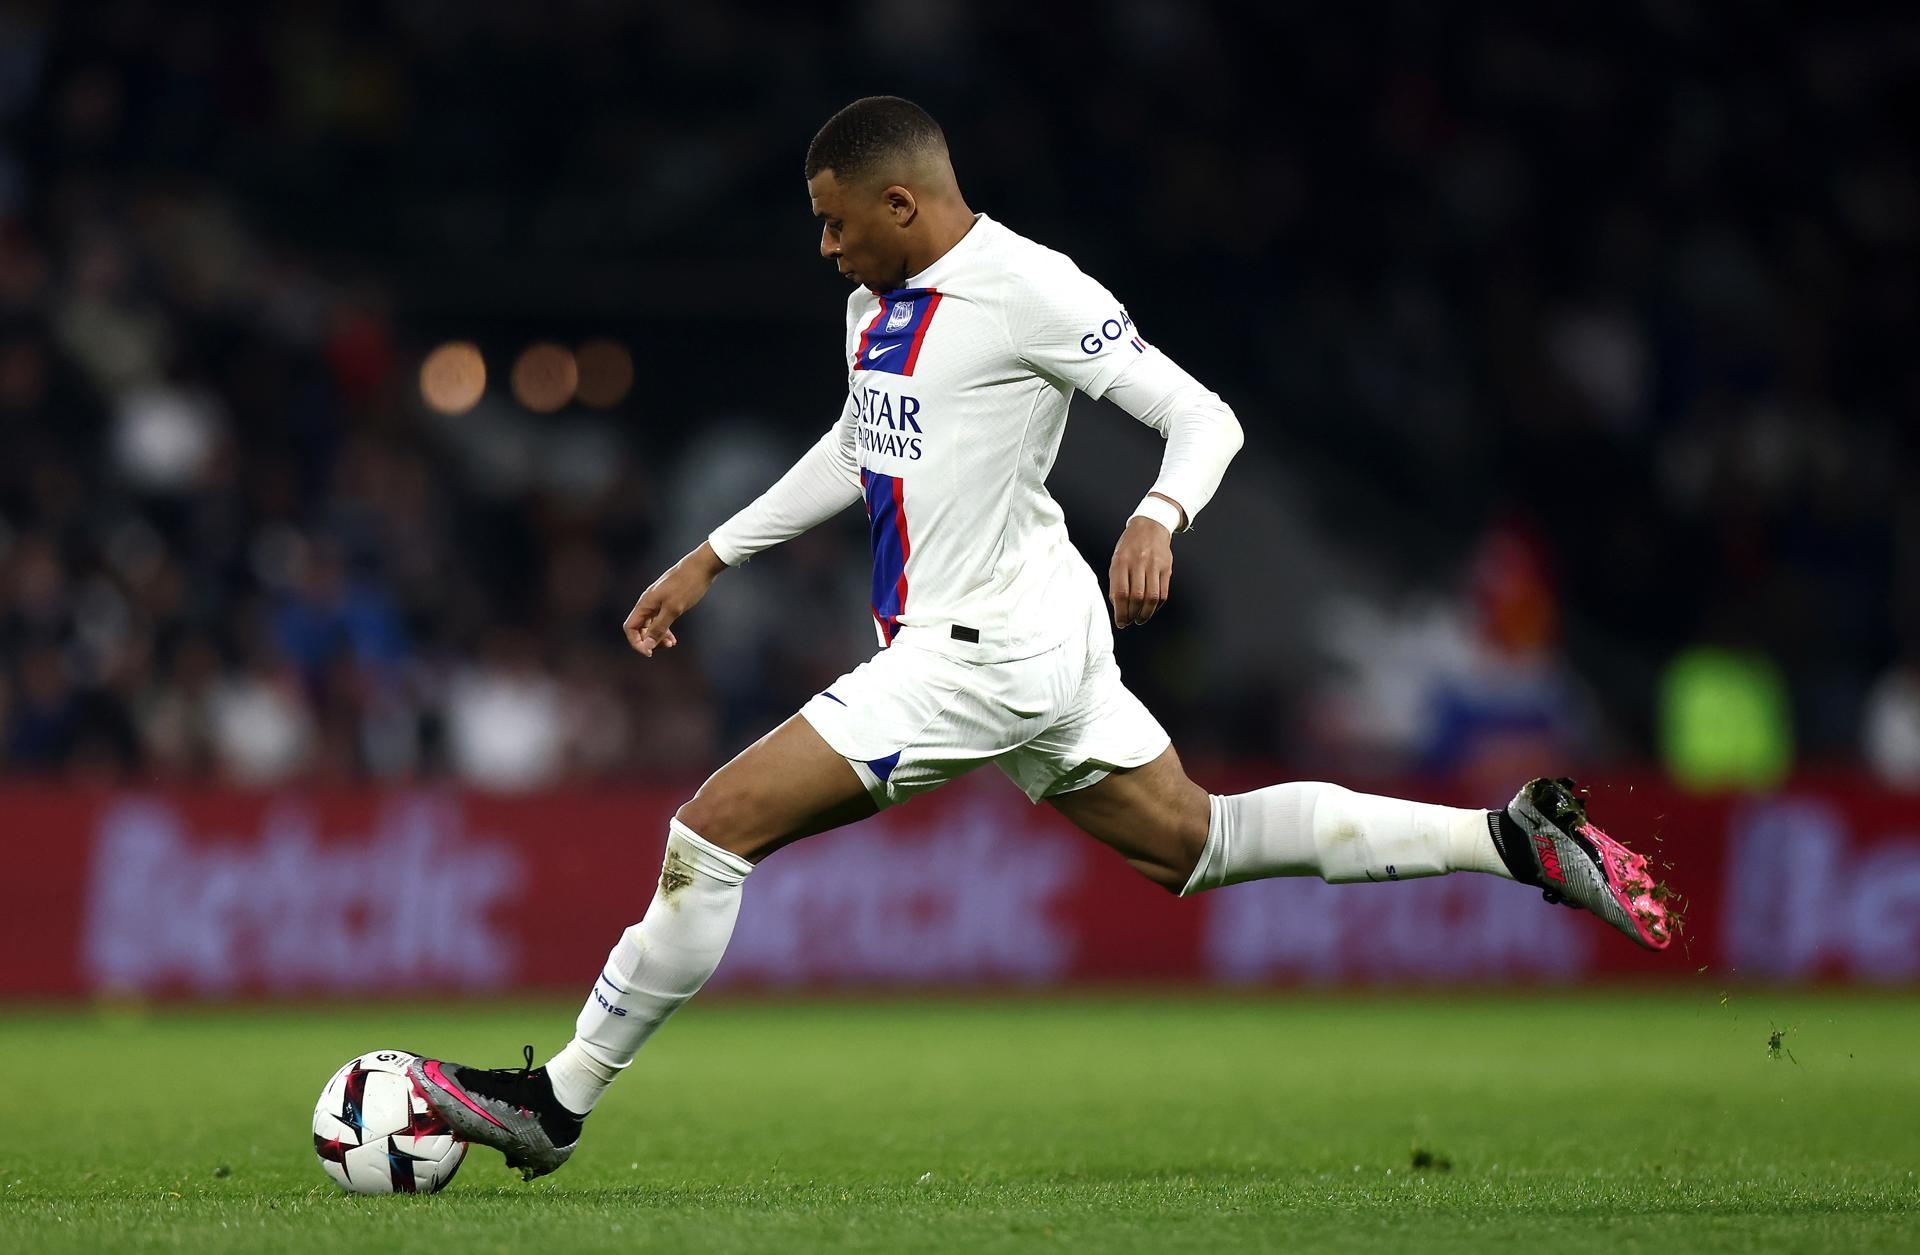 Haaland's inner circle claim Mbappe will join Madrid